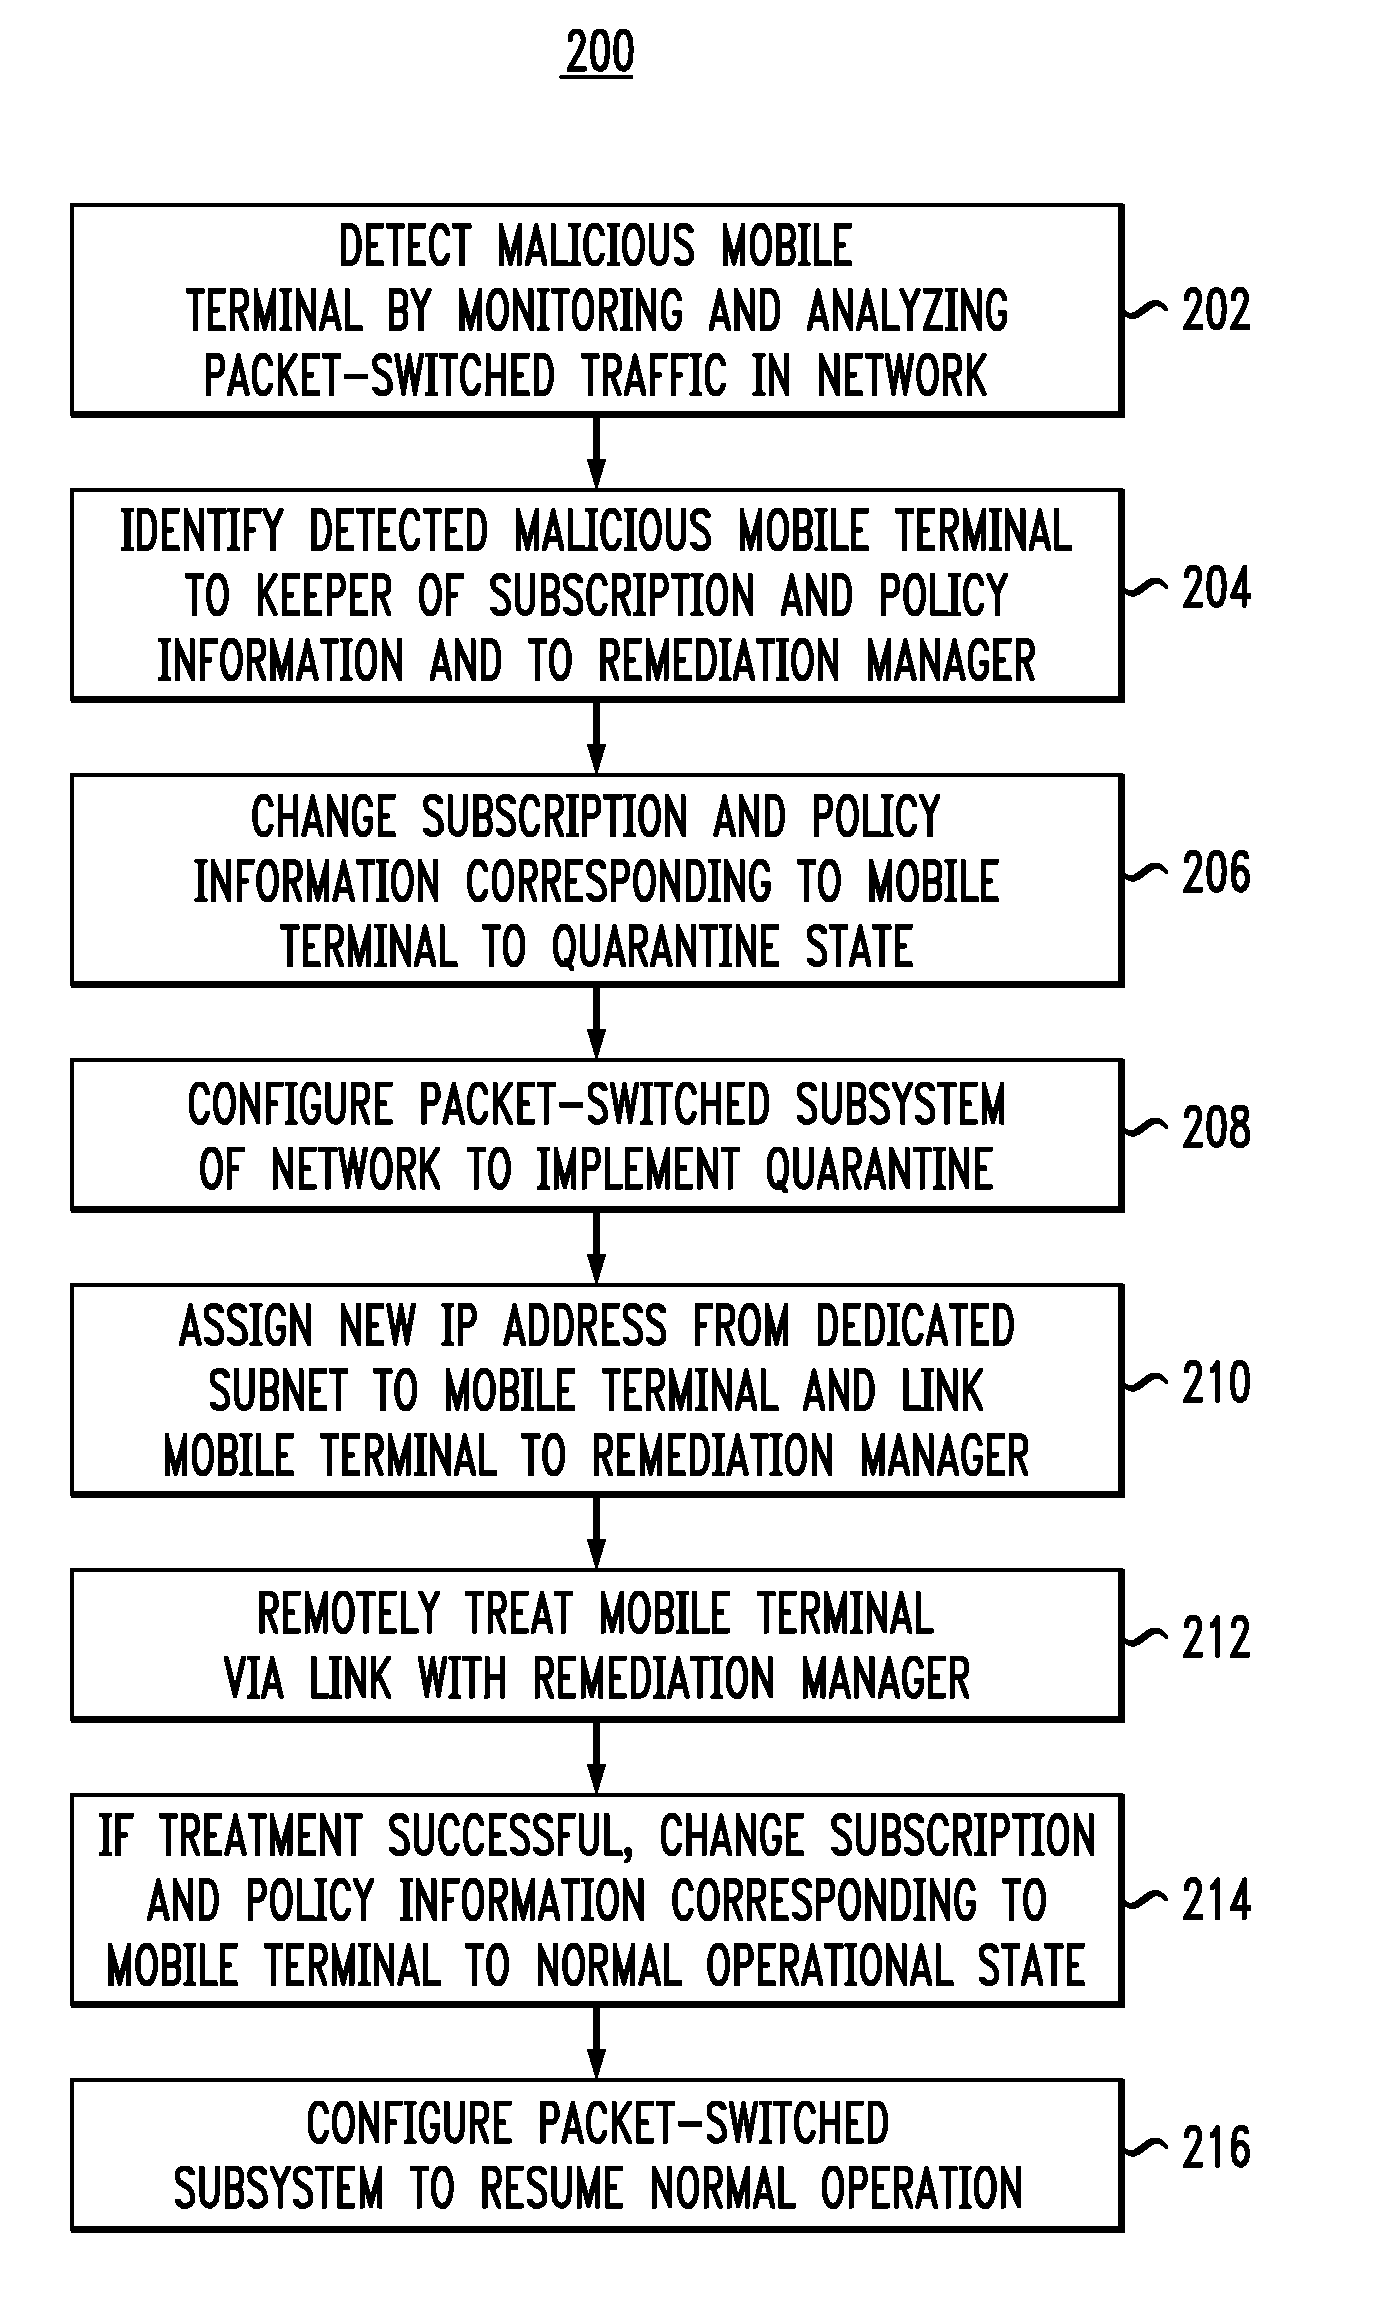 Treatment of malicious devices in a mobile-communications network